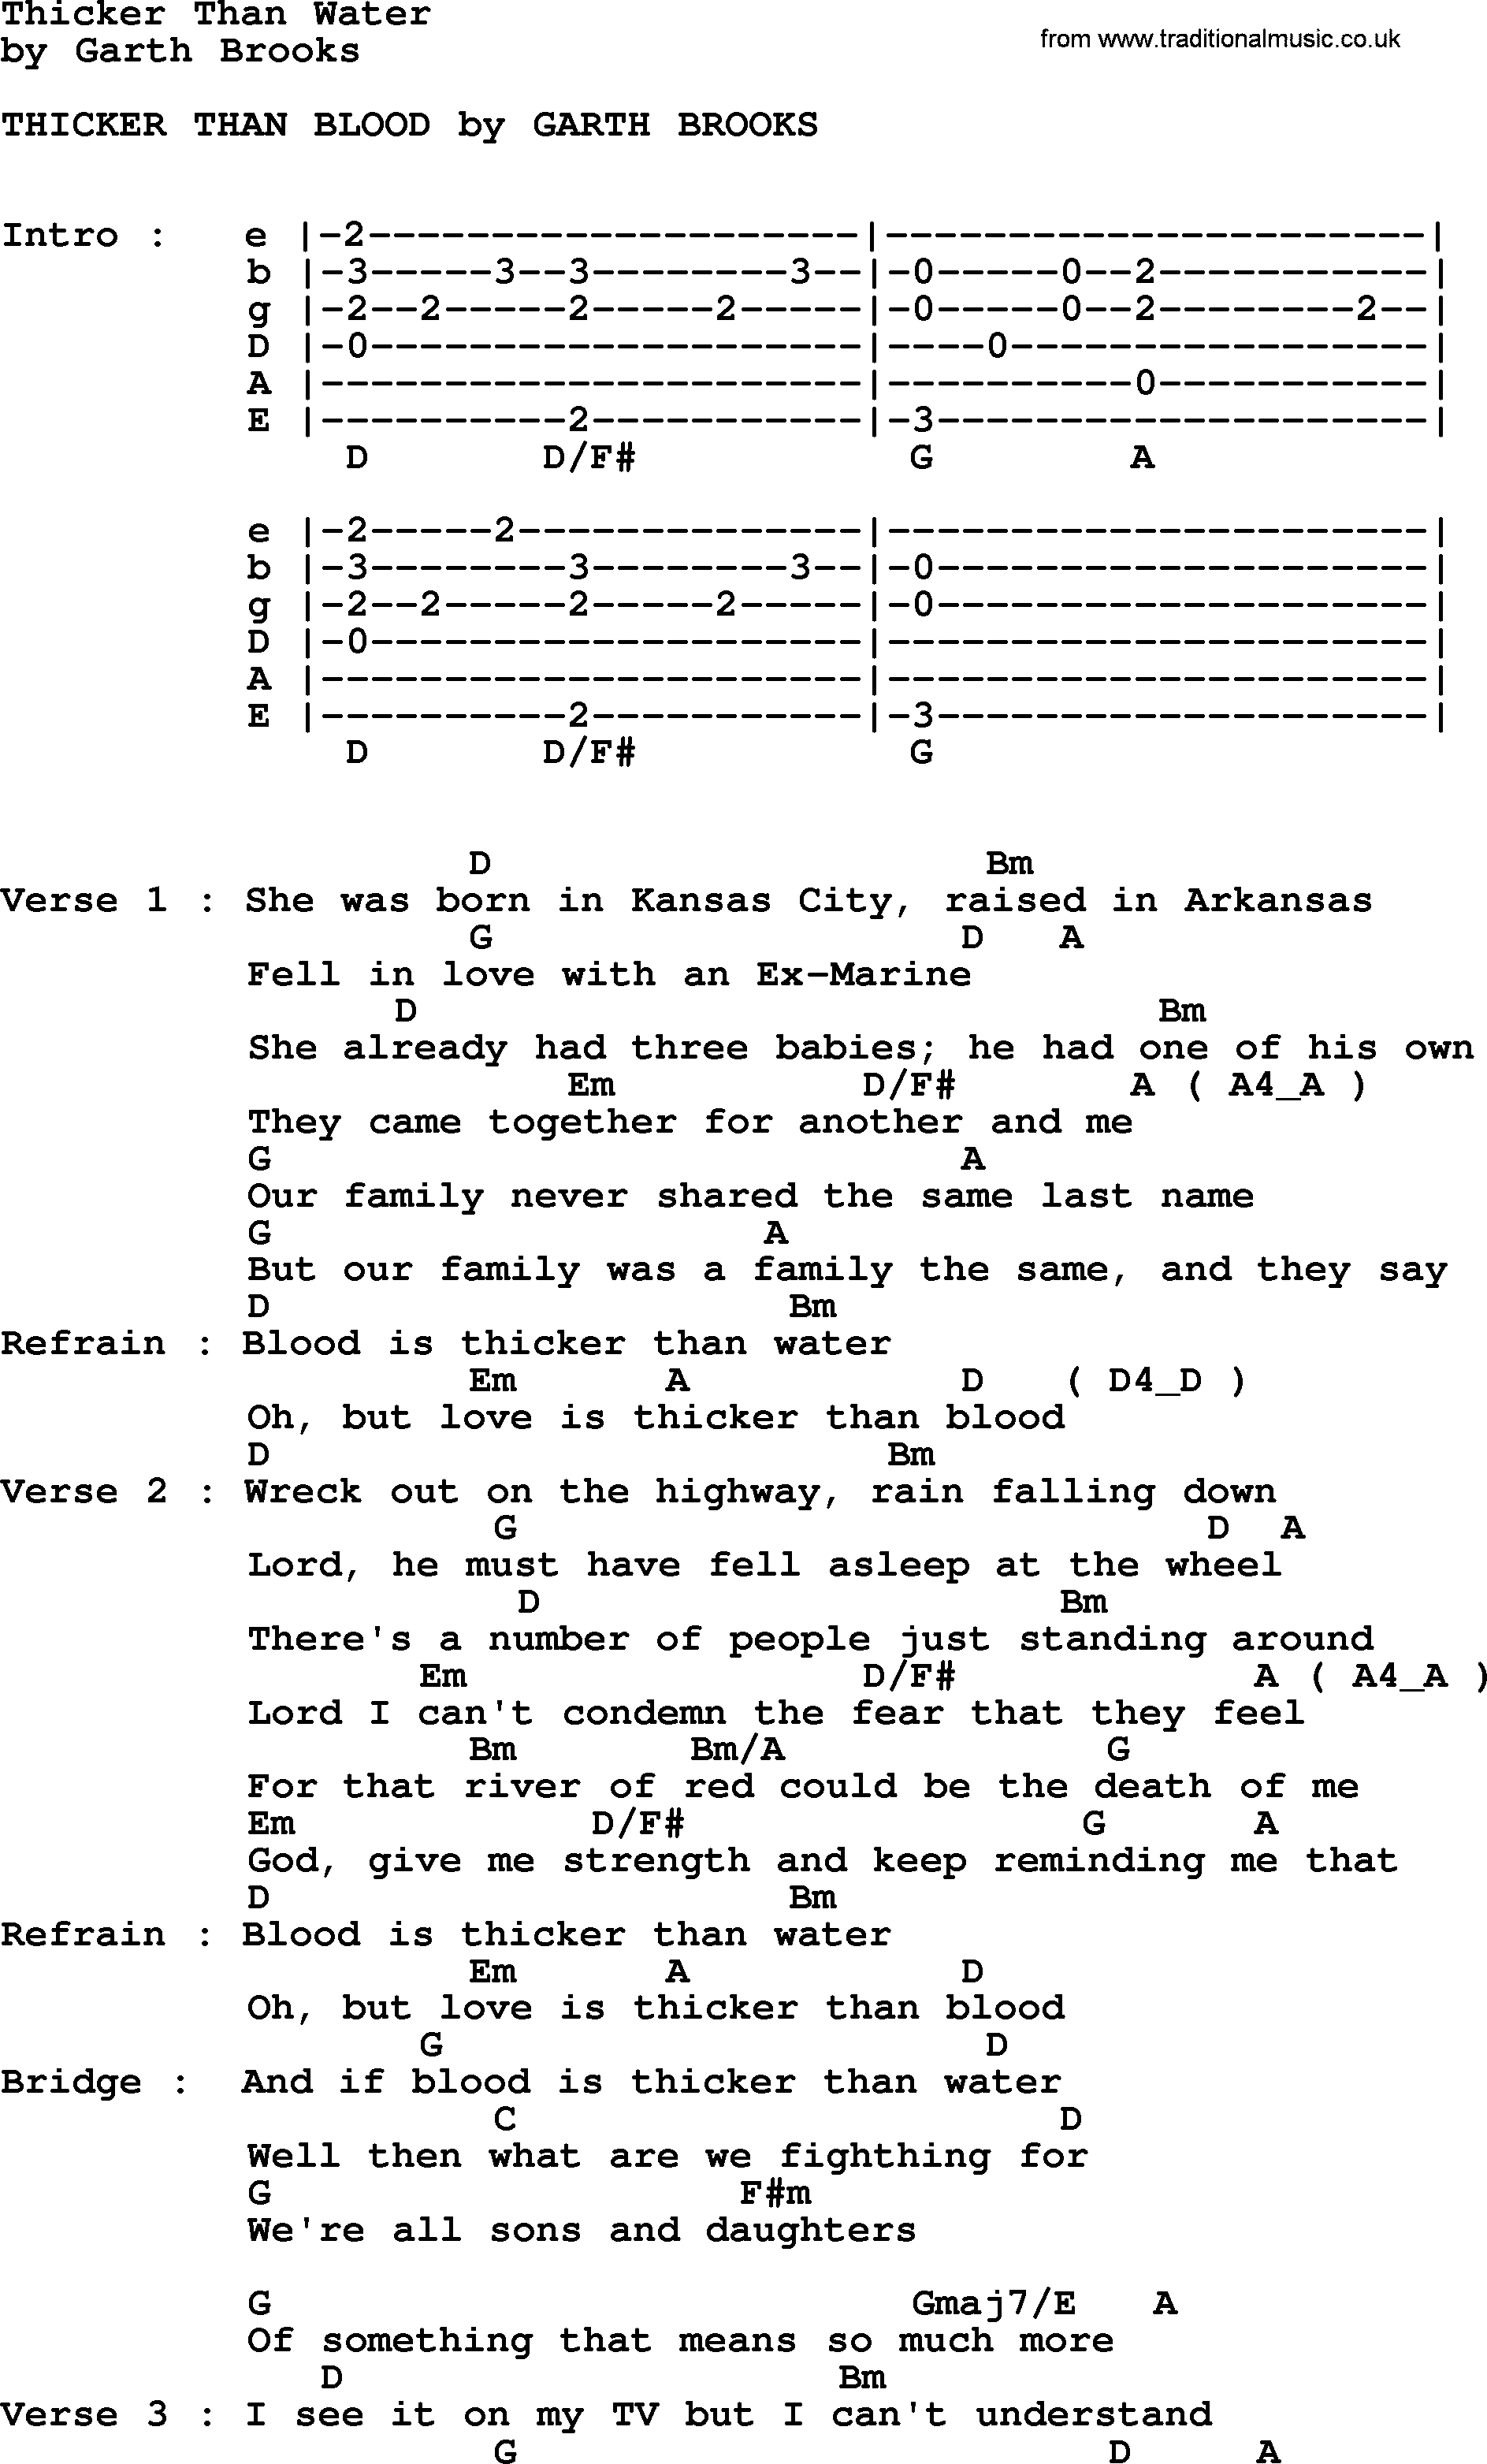 Garth Brooks song: Thicker Than Water, lyrics and chords